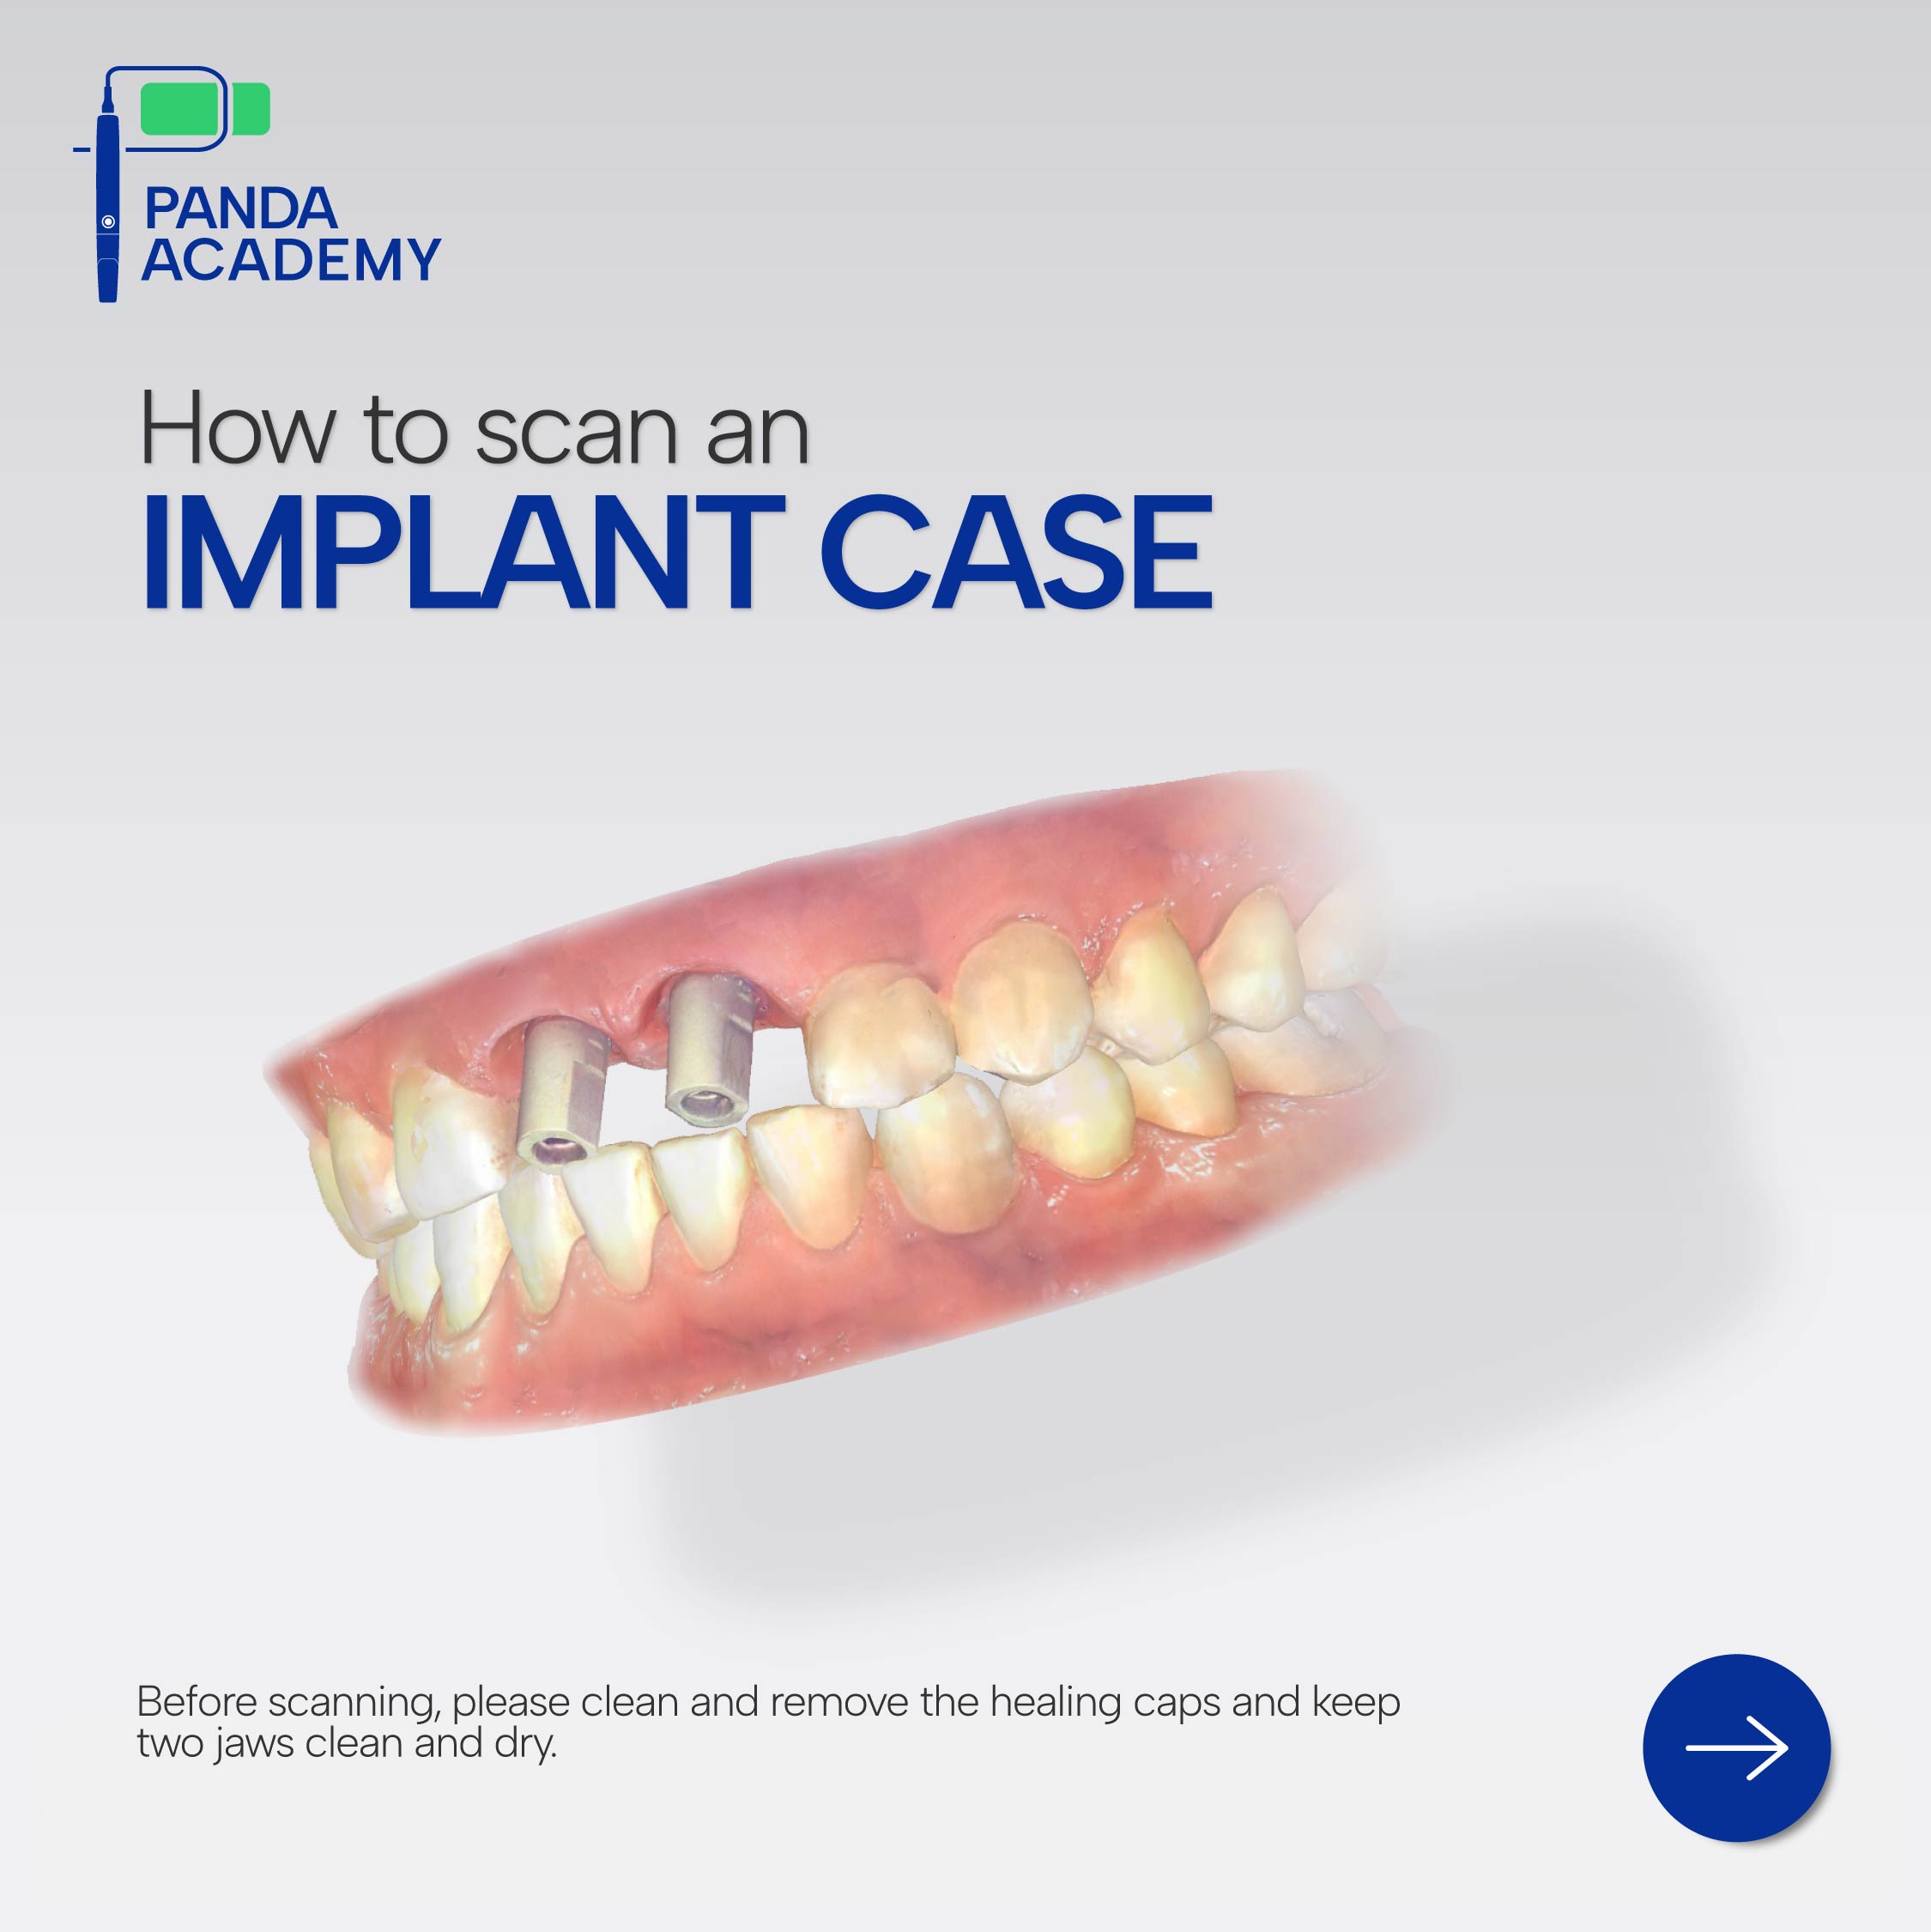 PANDA ACADEMY: How to Scan an Implant Case?